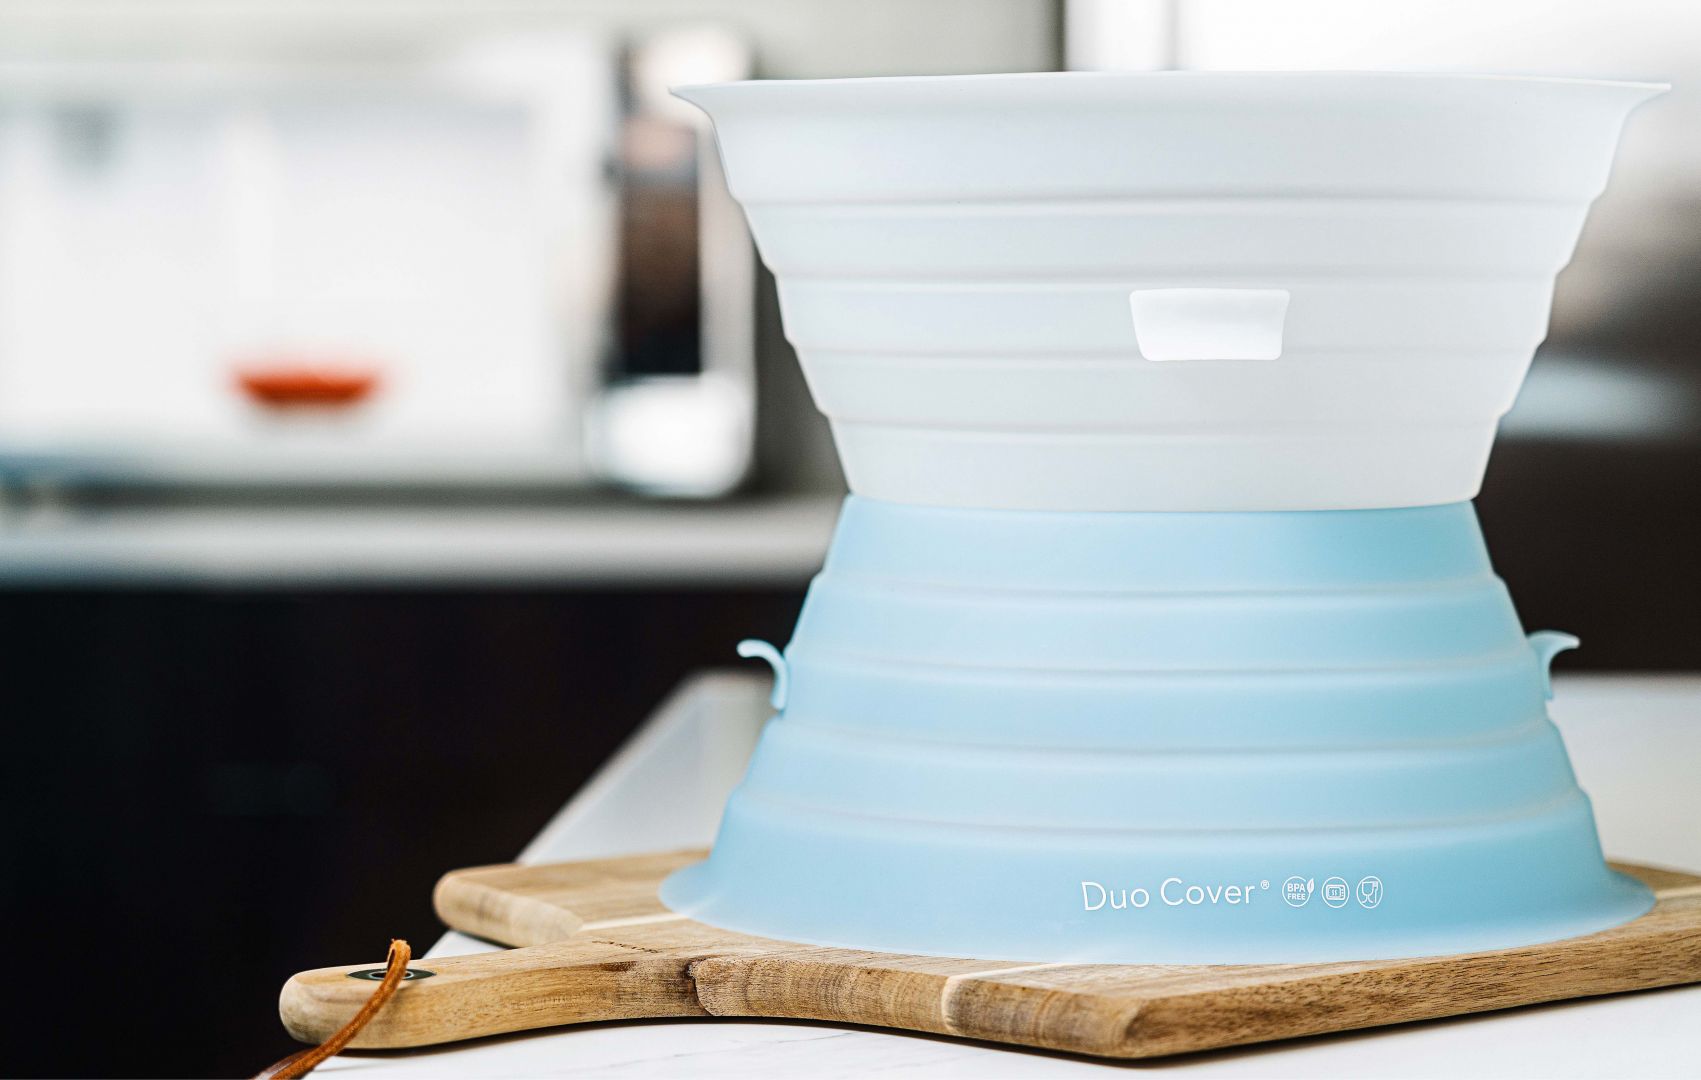 Two Pillar Unveils Another Innovative Kitchen Gadget: Duo Cover